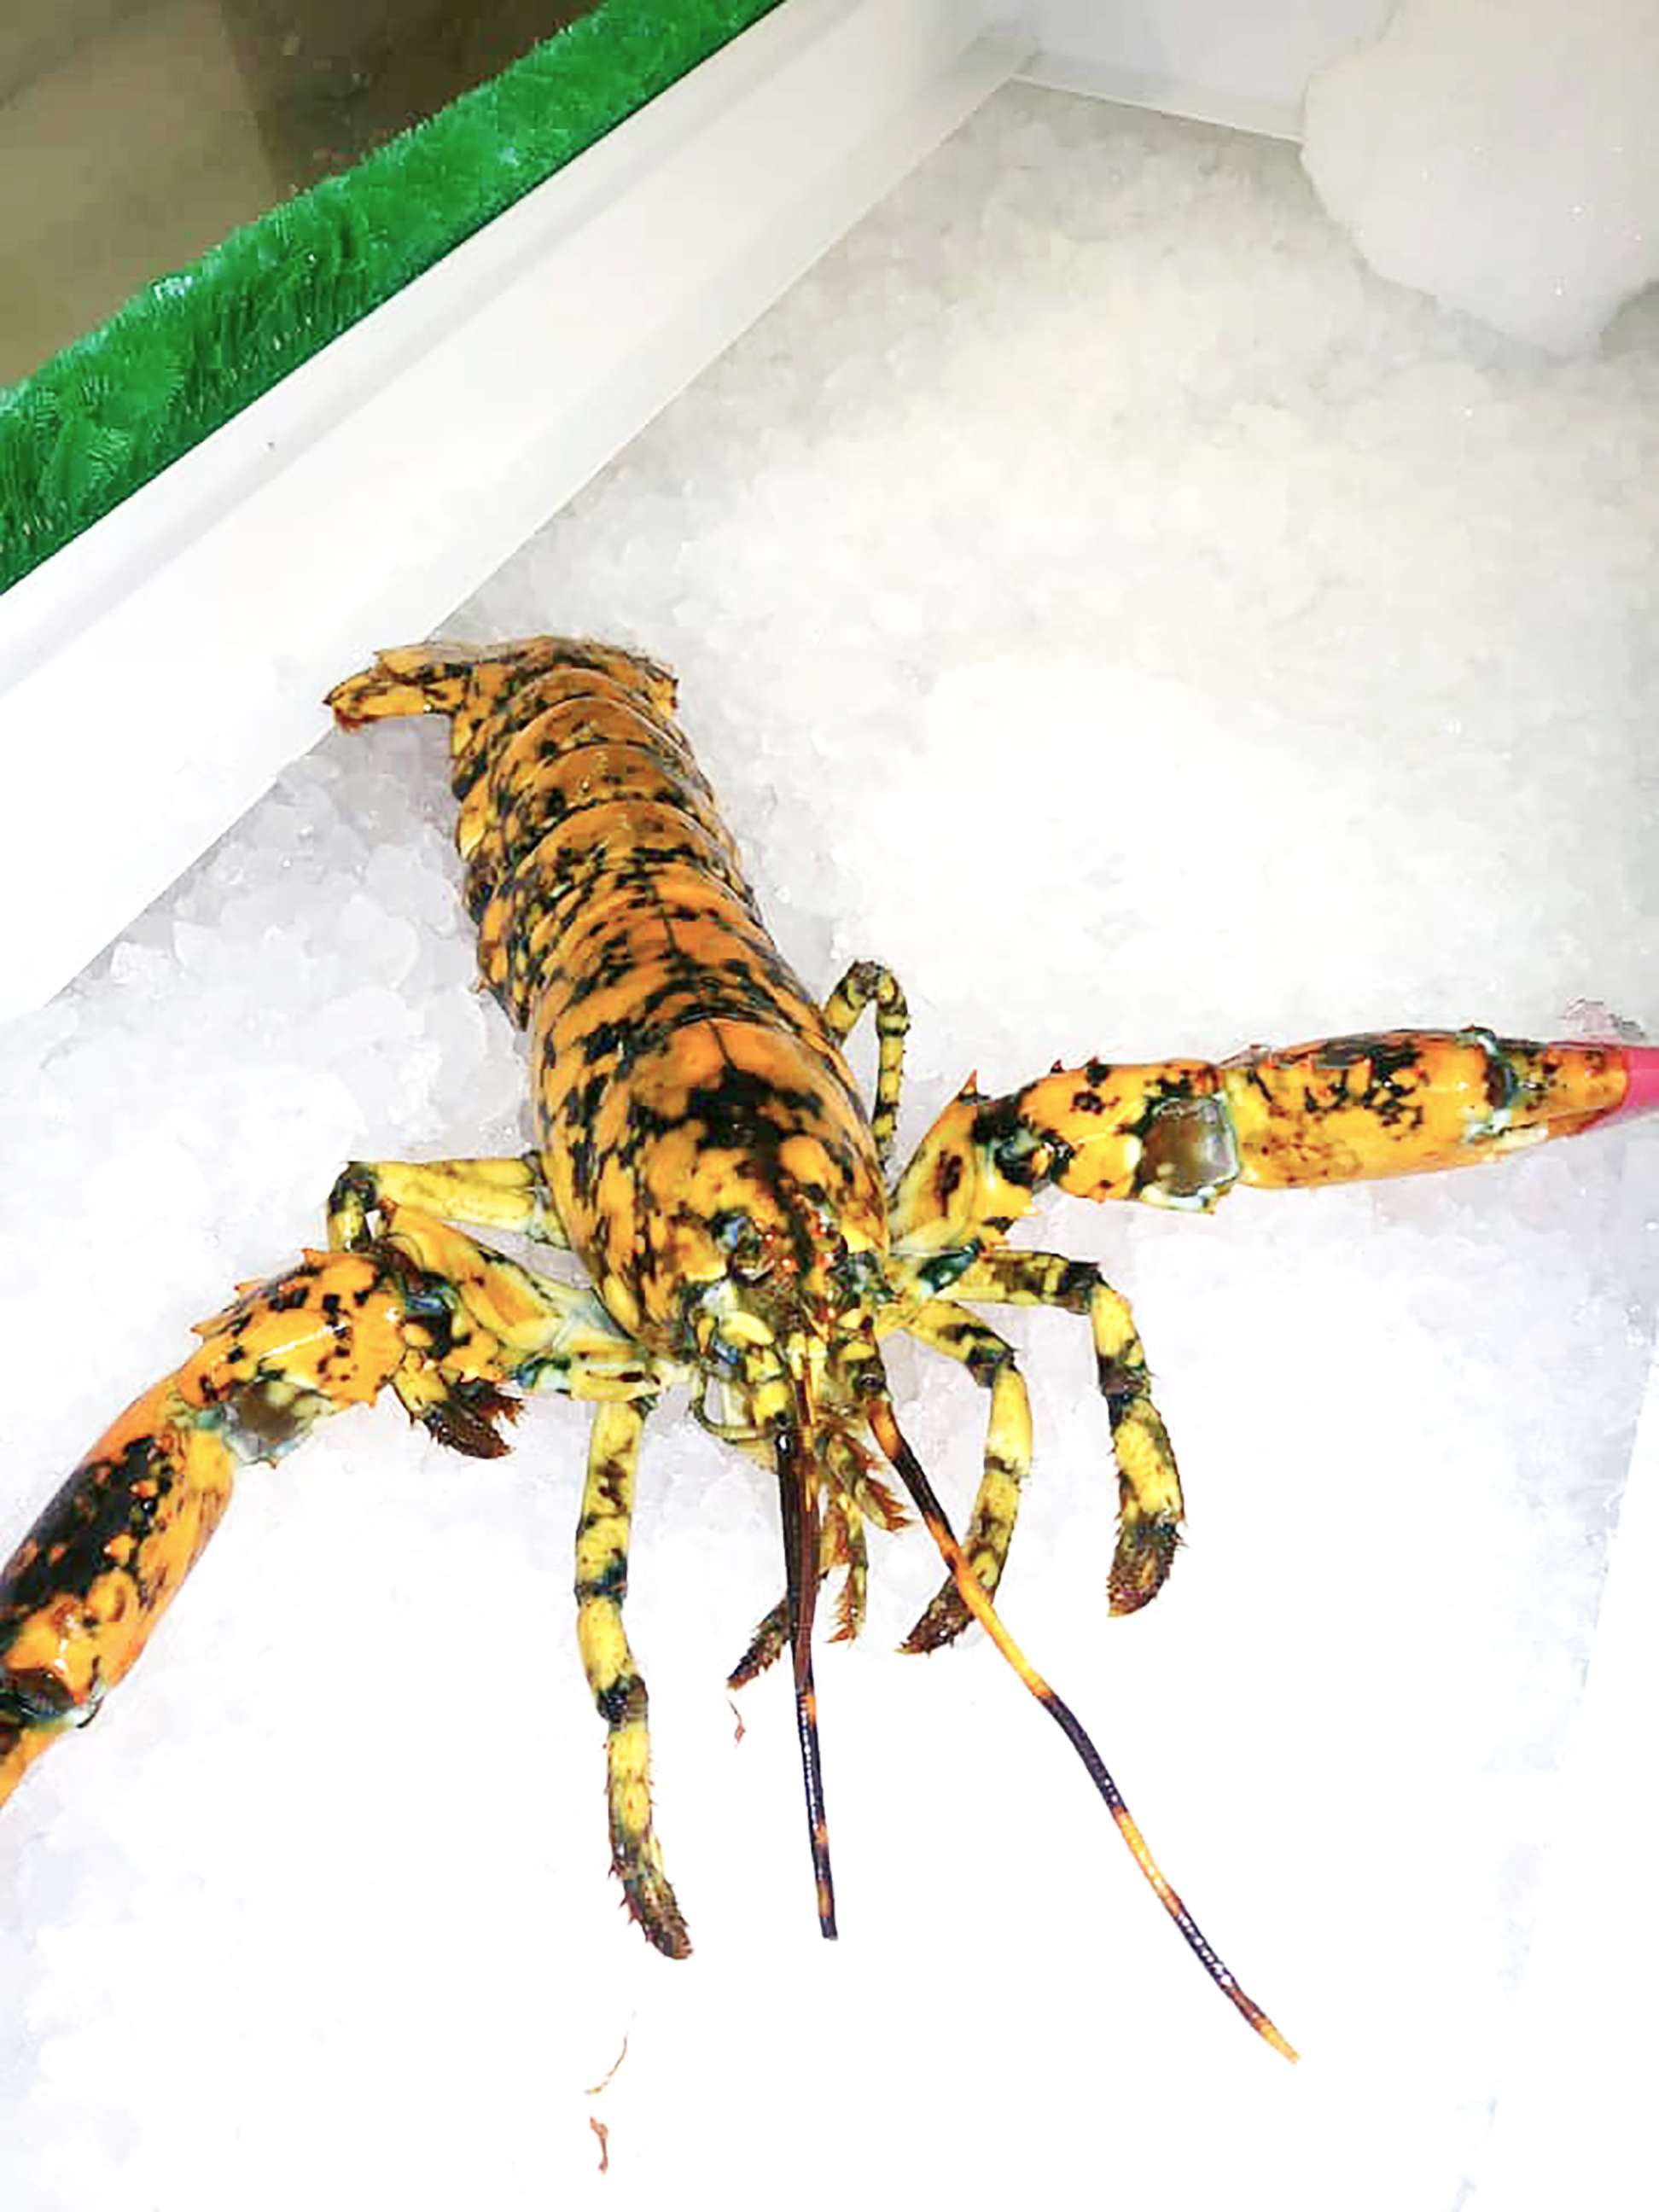 PHOTO: A rare calico lobster was found at the Ocean City Seafood fish market on Dec. 21., 2018.